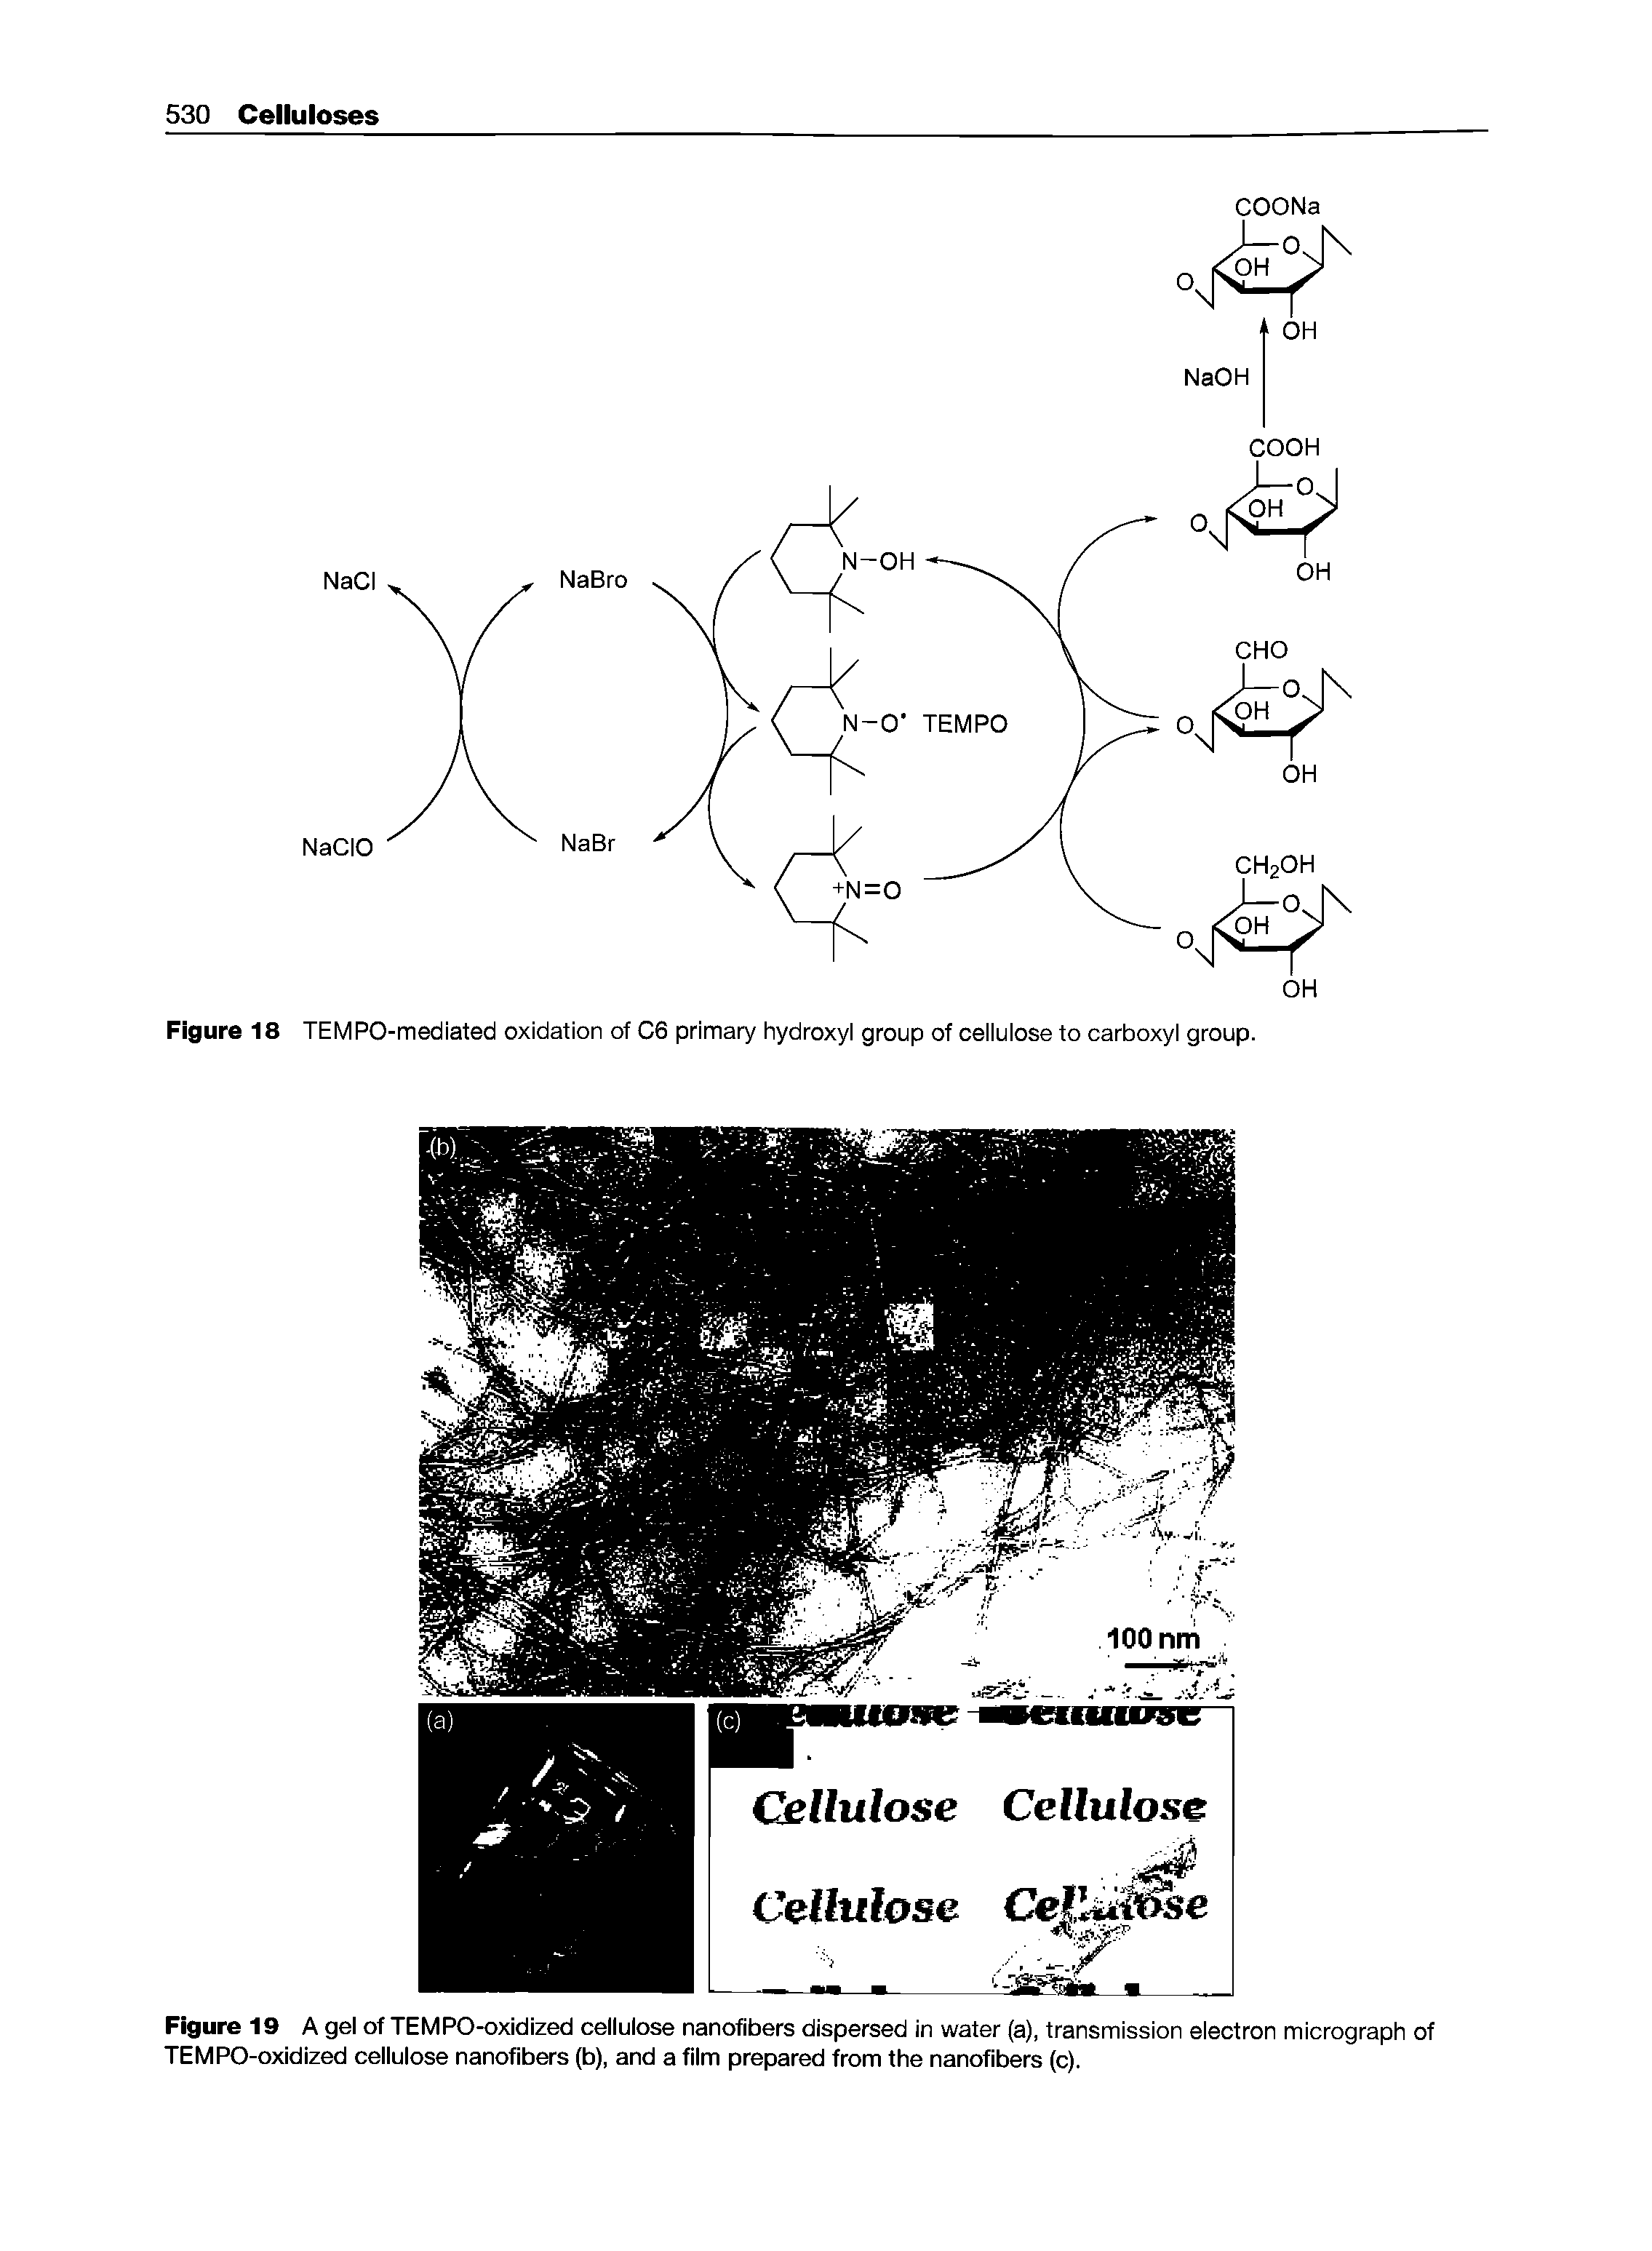 Figure 19 A gel of TEMPO-oxidized cellulose nanofibers dispersed in water (a), transmission eieotron micrograph of TEMPO-oxidized cellulose nanofibers (b), and a film prepared from the nanofibers (c).